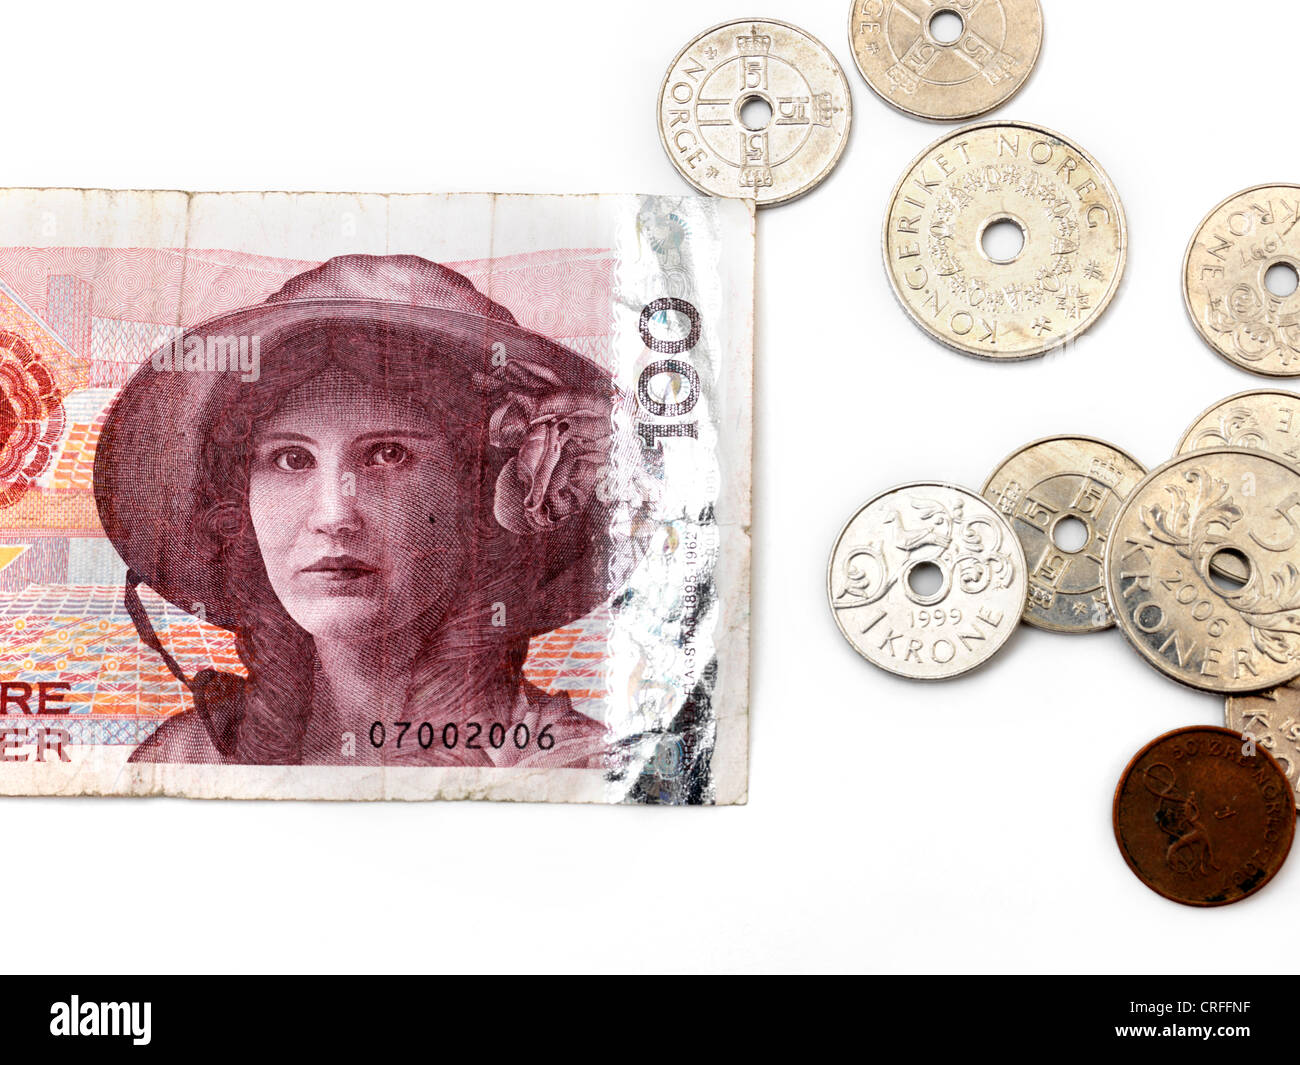 Norwegian Kroner Banknote And Coins - Ore, 1 krone, 5 Krone And 100 kroner  note showing Kristen Flagstad Stock Photo - Alamy